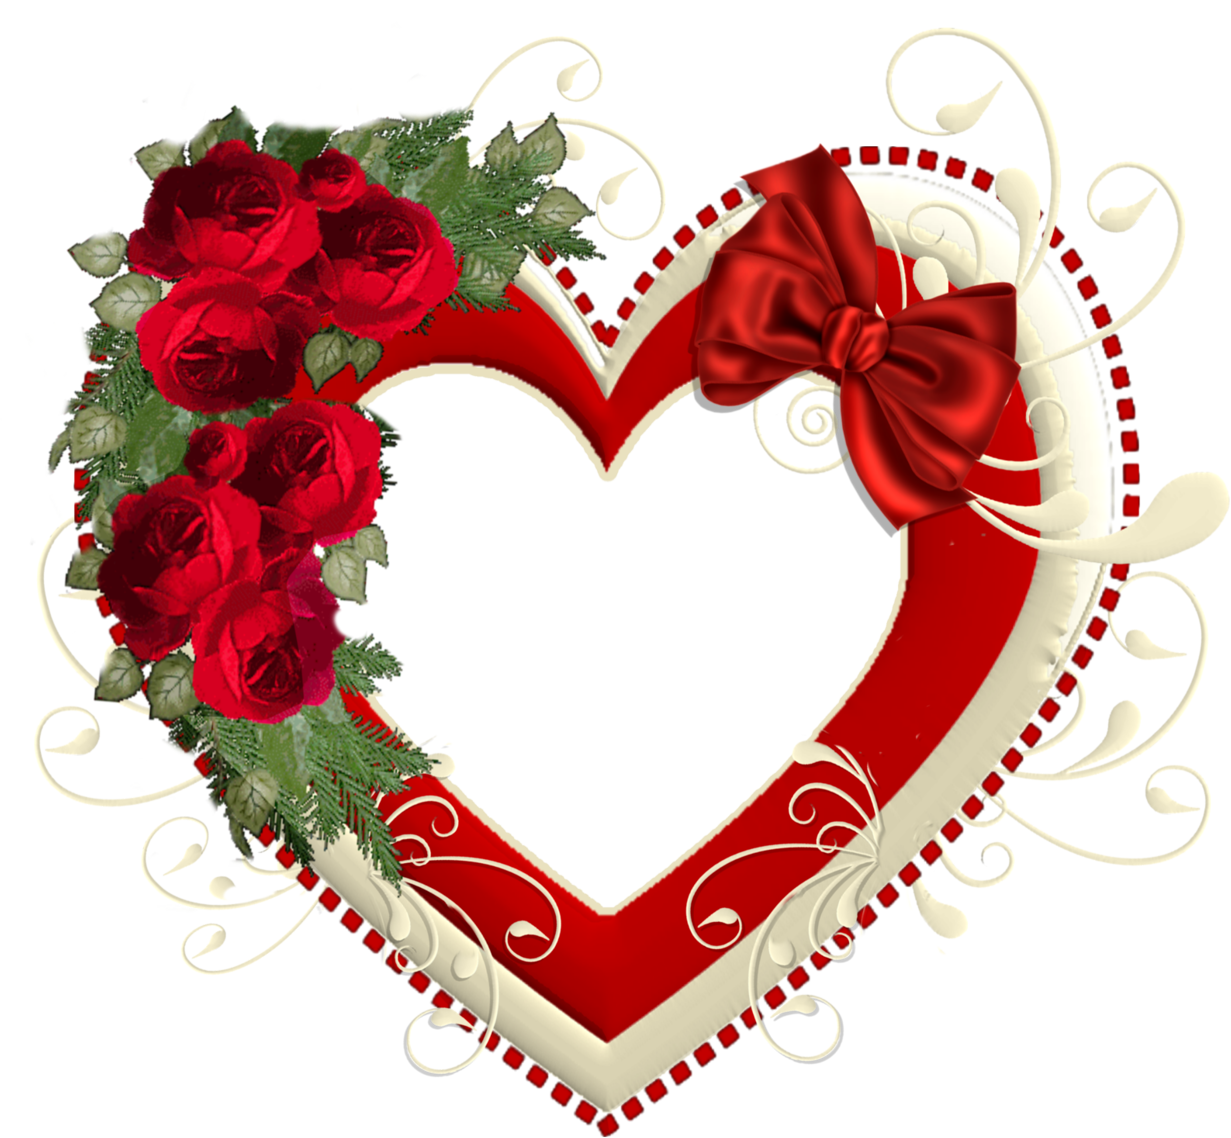 Heart Flower Love Free Download Image PNG Image